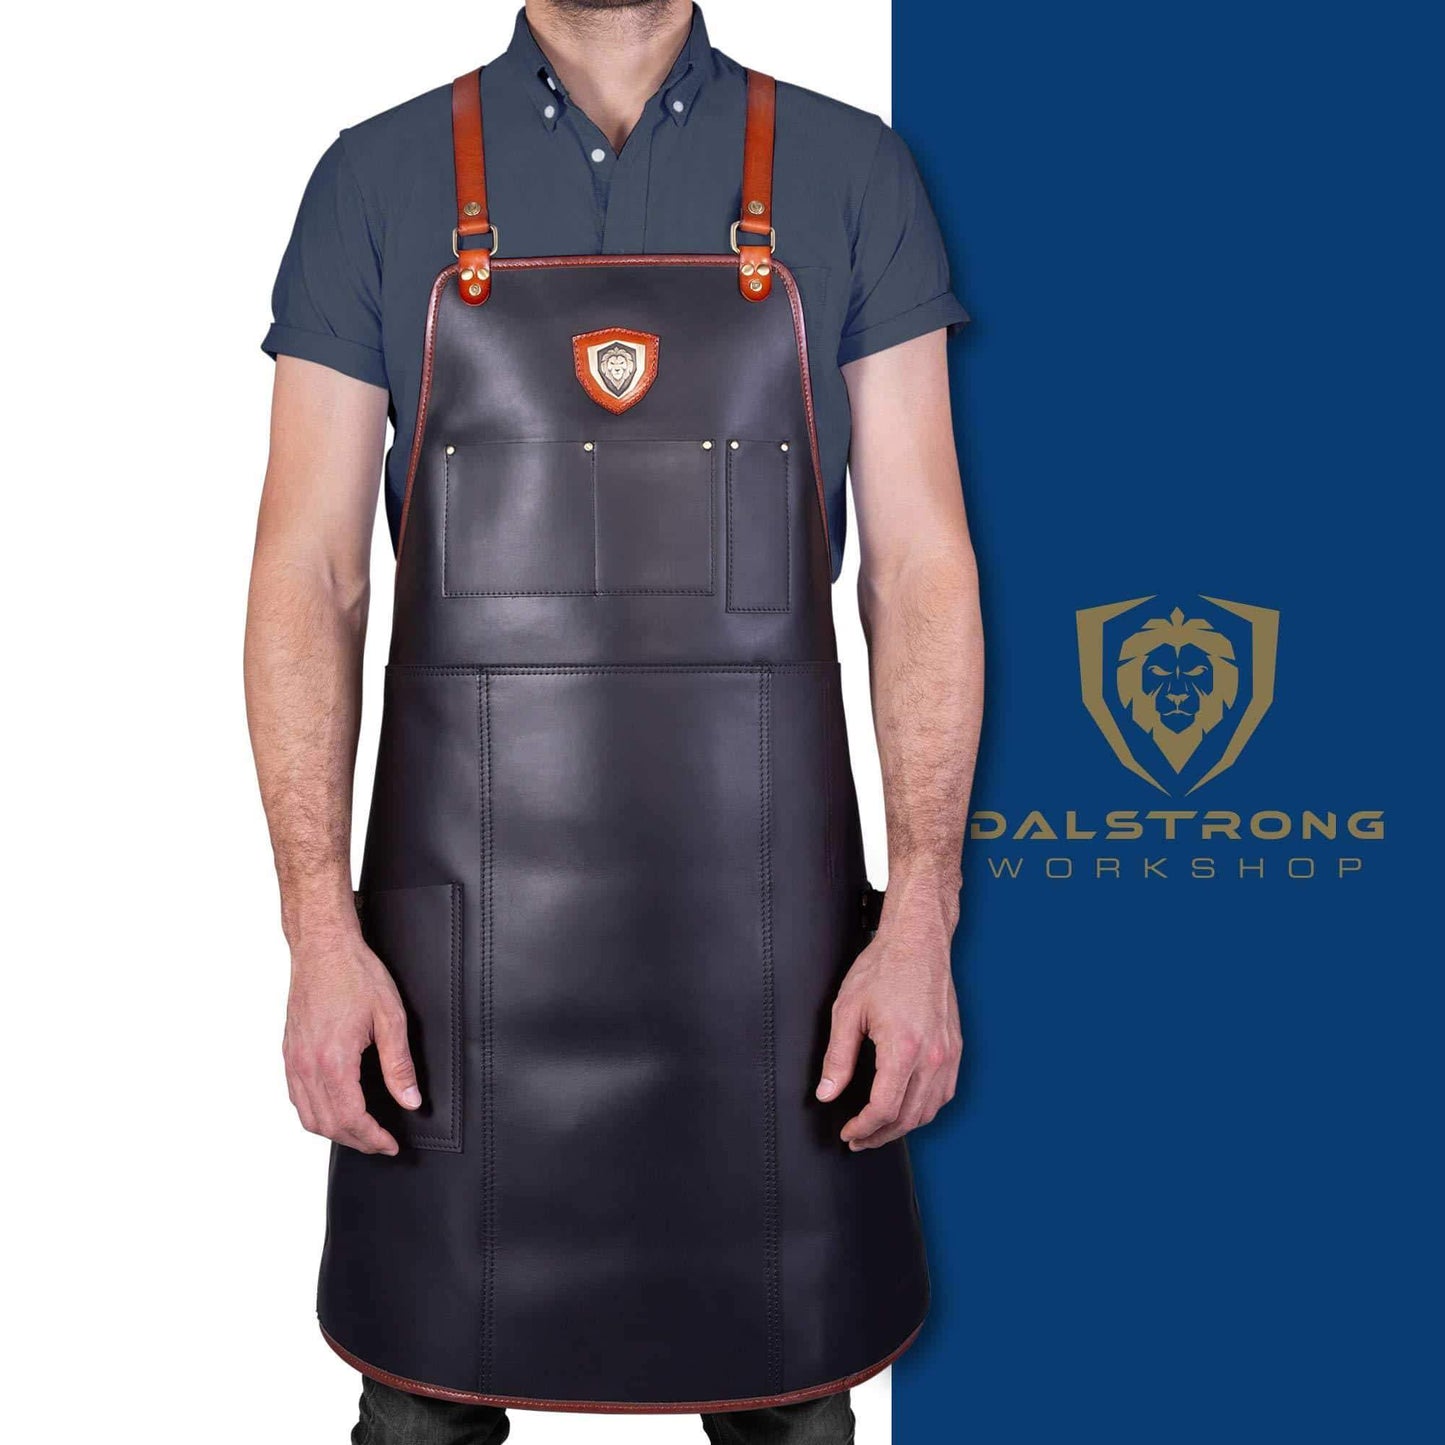 Top rated dalstrong professional chefs kitchen apron the culinary commander top grain leather 5 storage pockets towel tong loop fully adjustable harness straps heavy duty